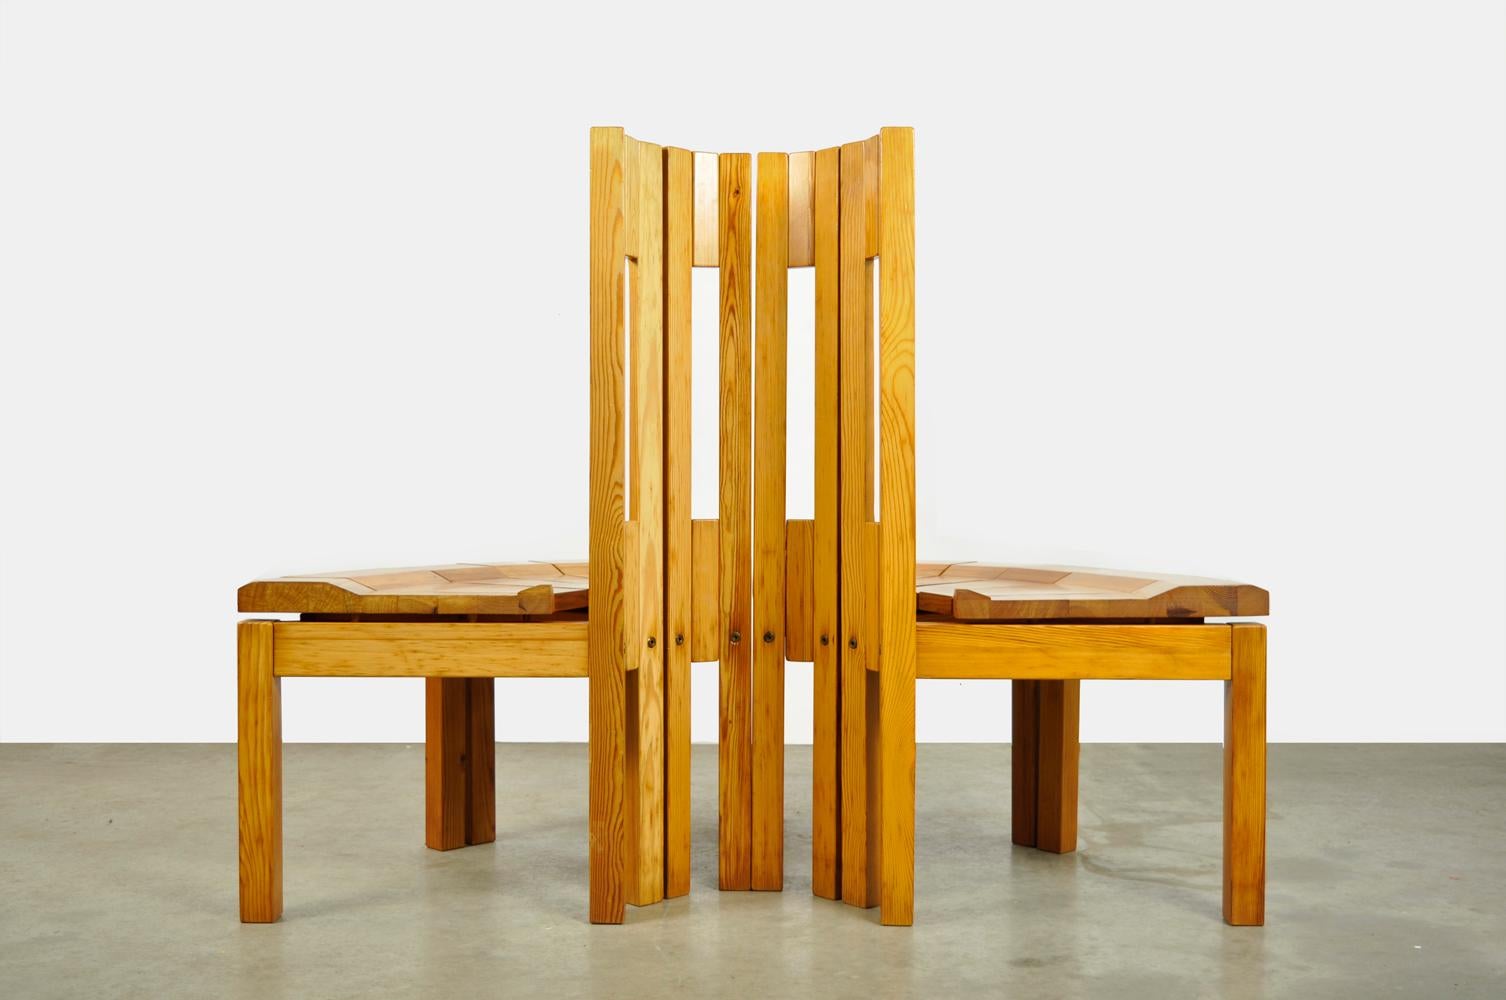 Excptional set of 4 sculptural Finnish dining table chairs designed by Arnold Lerber and produced by Laukaan Puu Finnland, 1970s. The entire chair is made of solid fir wood (silver fir or pine). 
The design of the seats offers many variations in